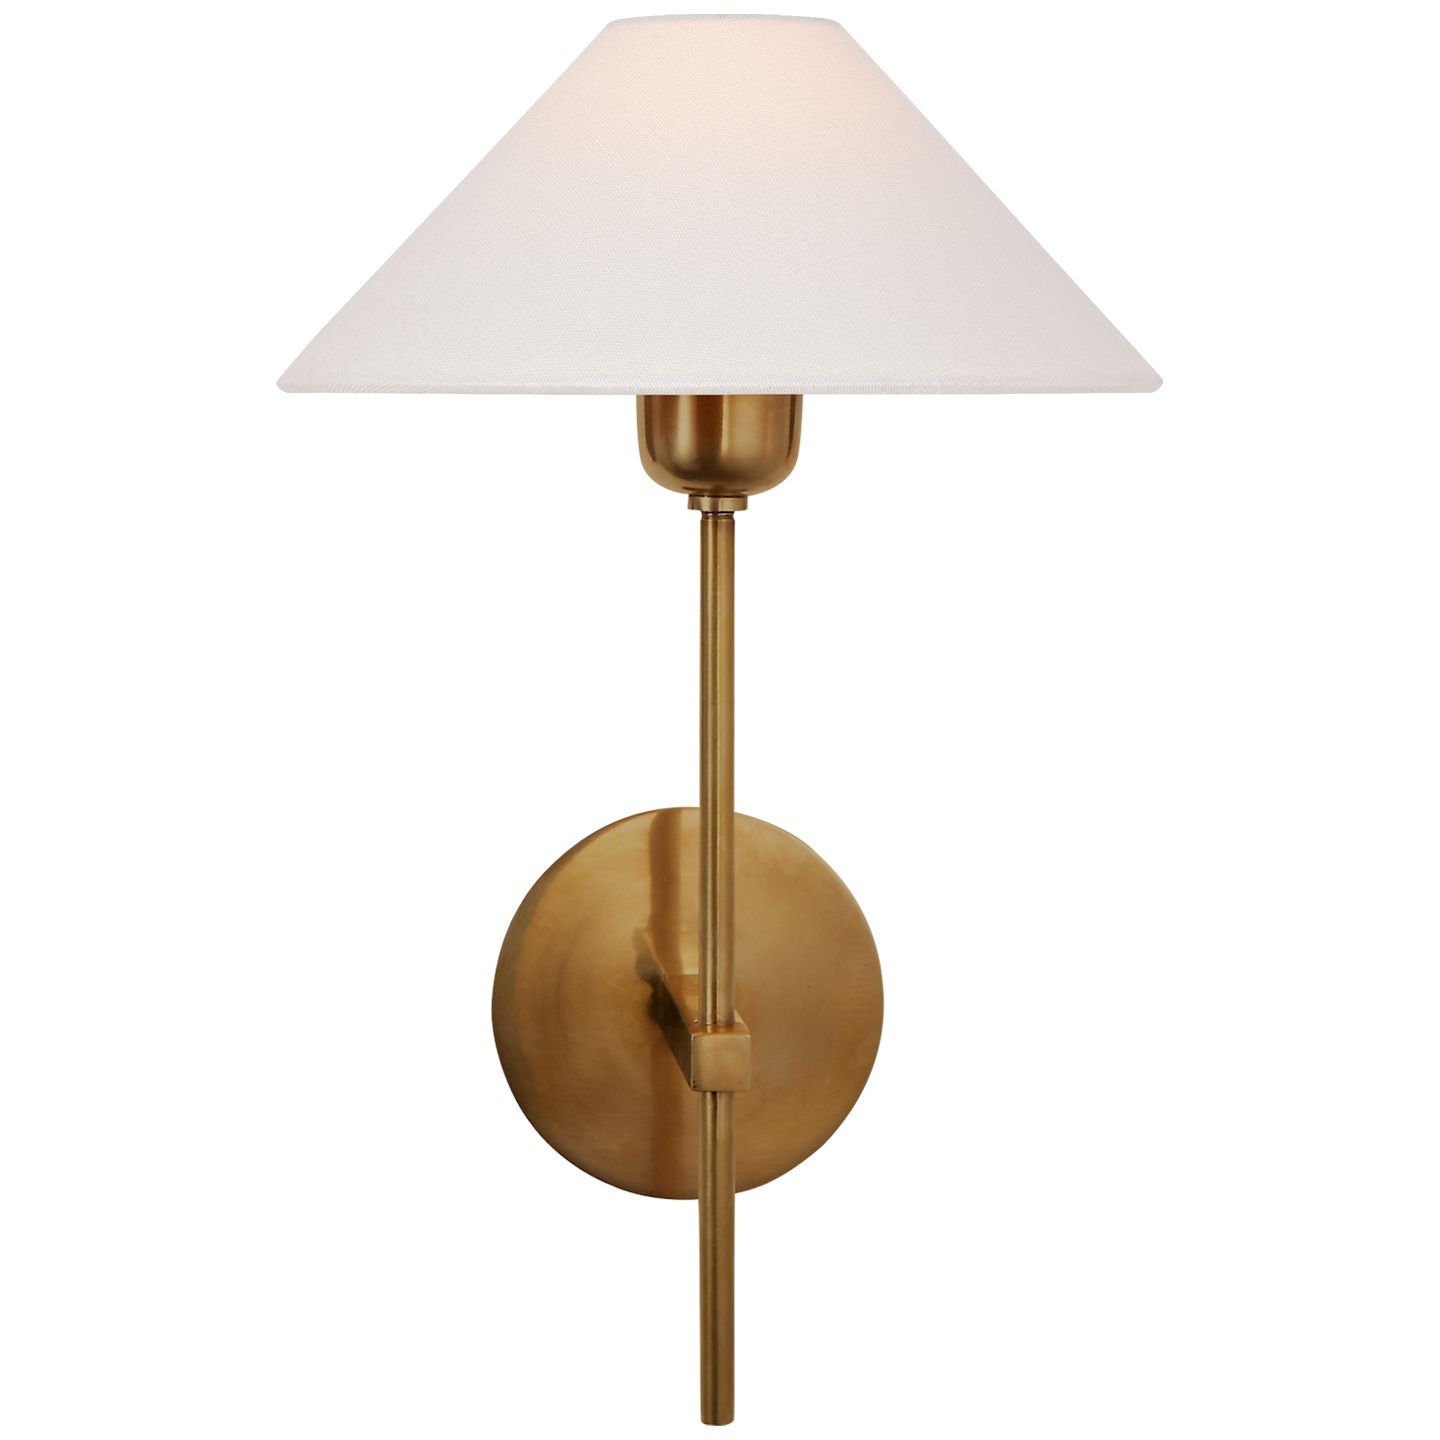 Hackney Single Sconce in Hand-Rubbed Antique Brass with Linen Shade | Visual Comfort